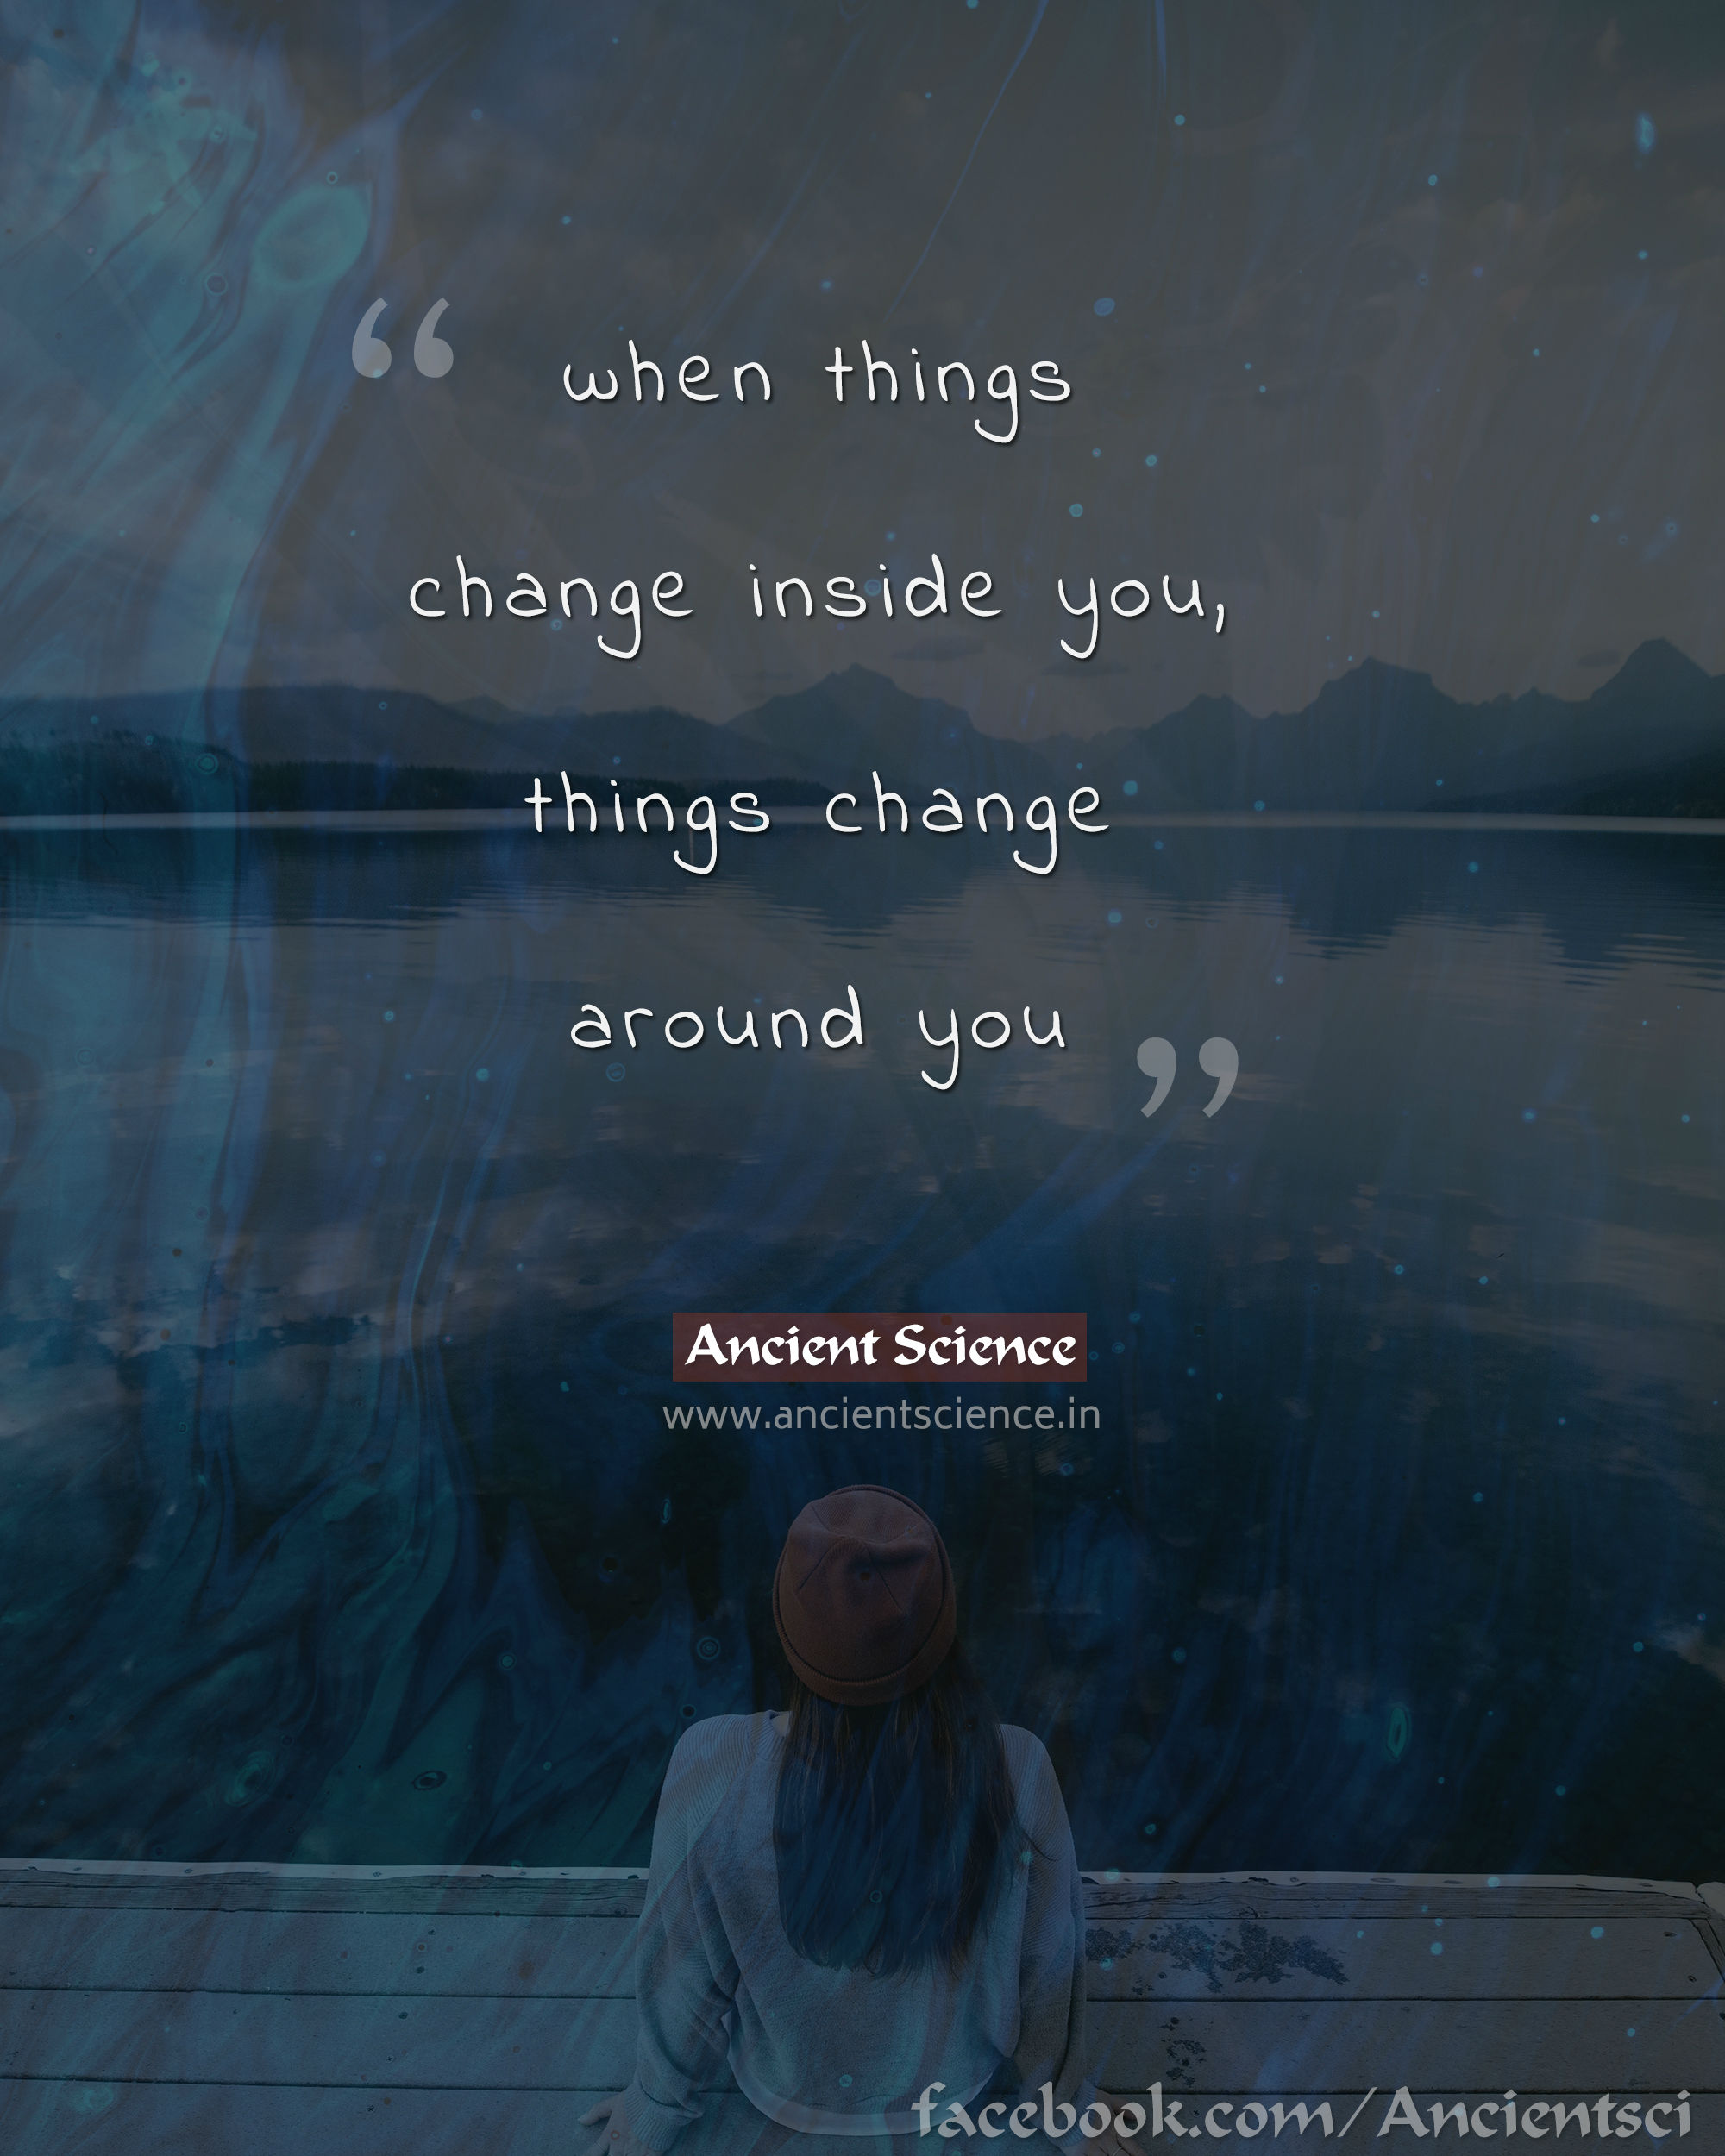 When things change inside you, things change around you.